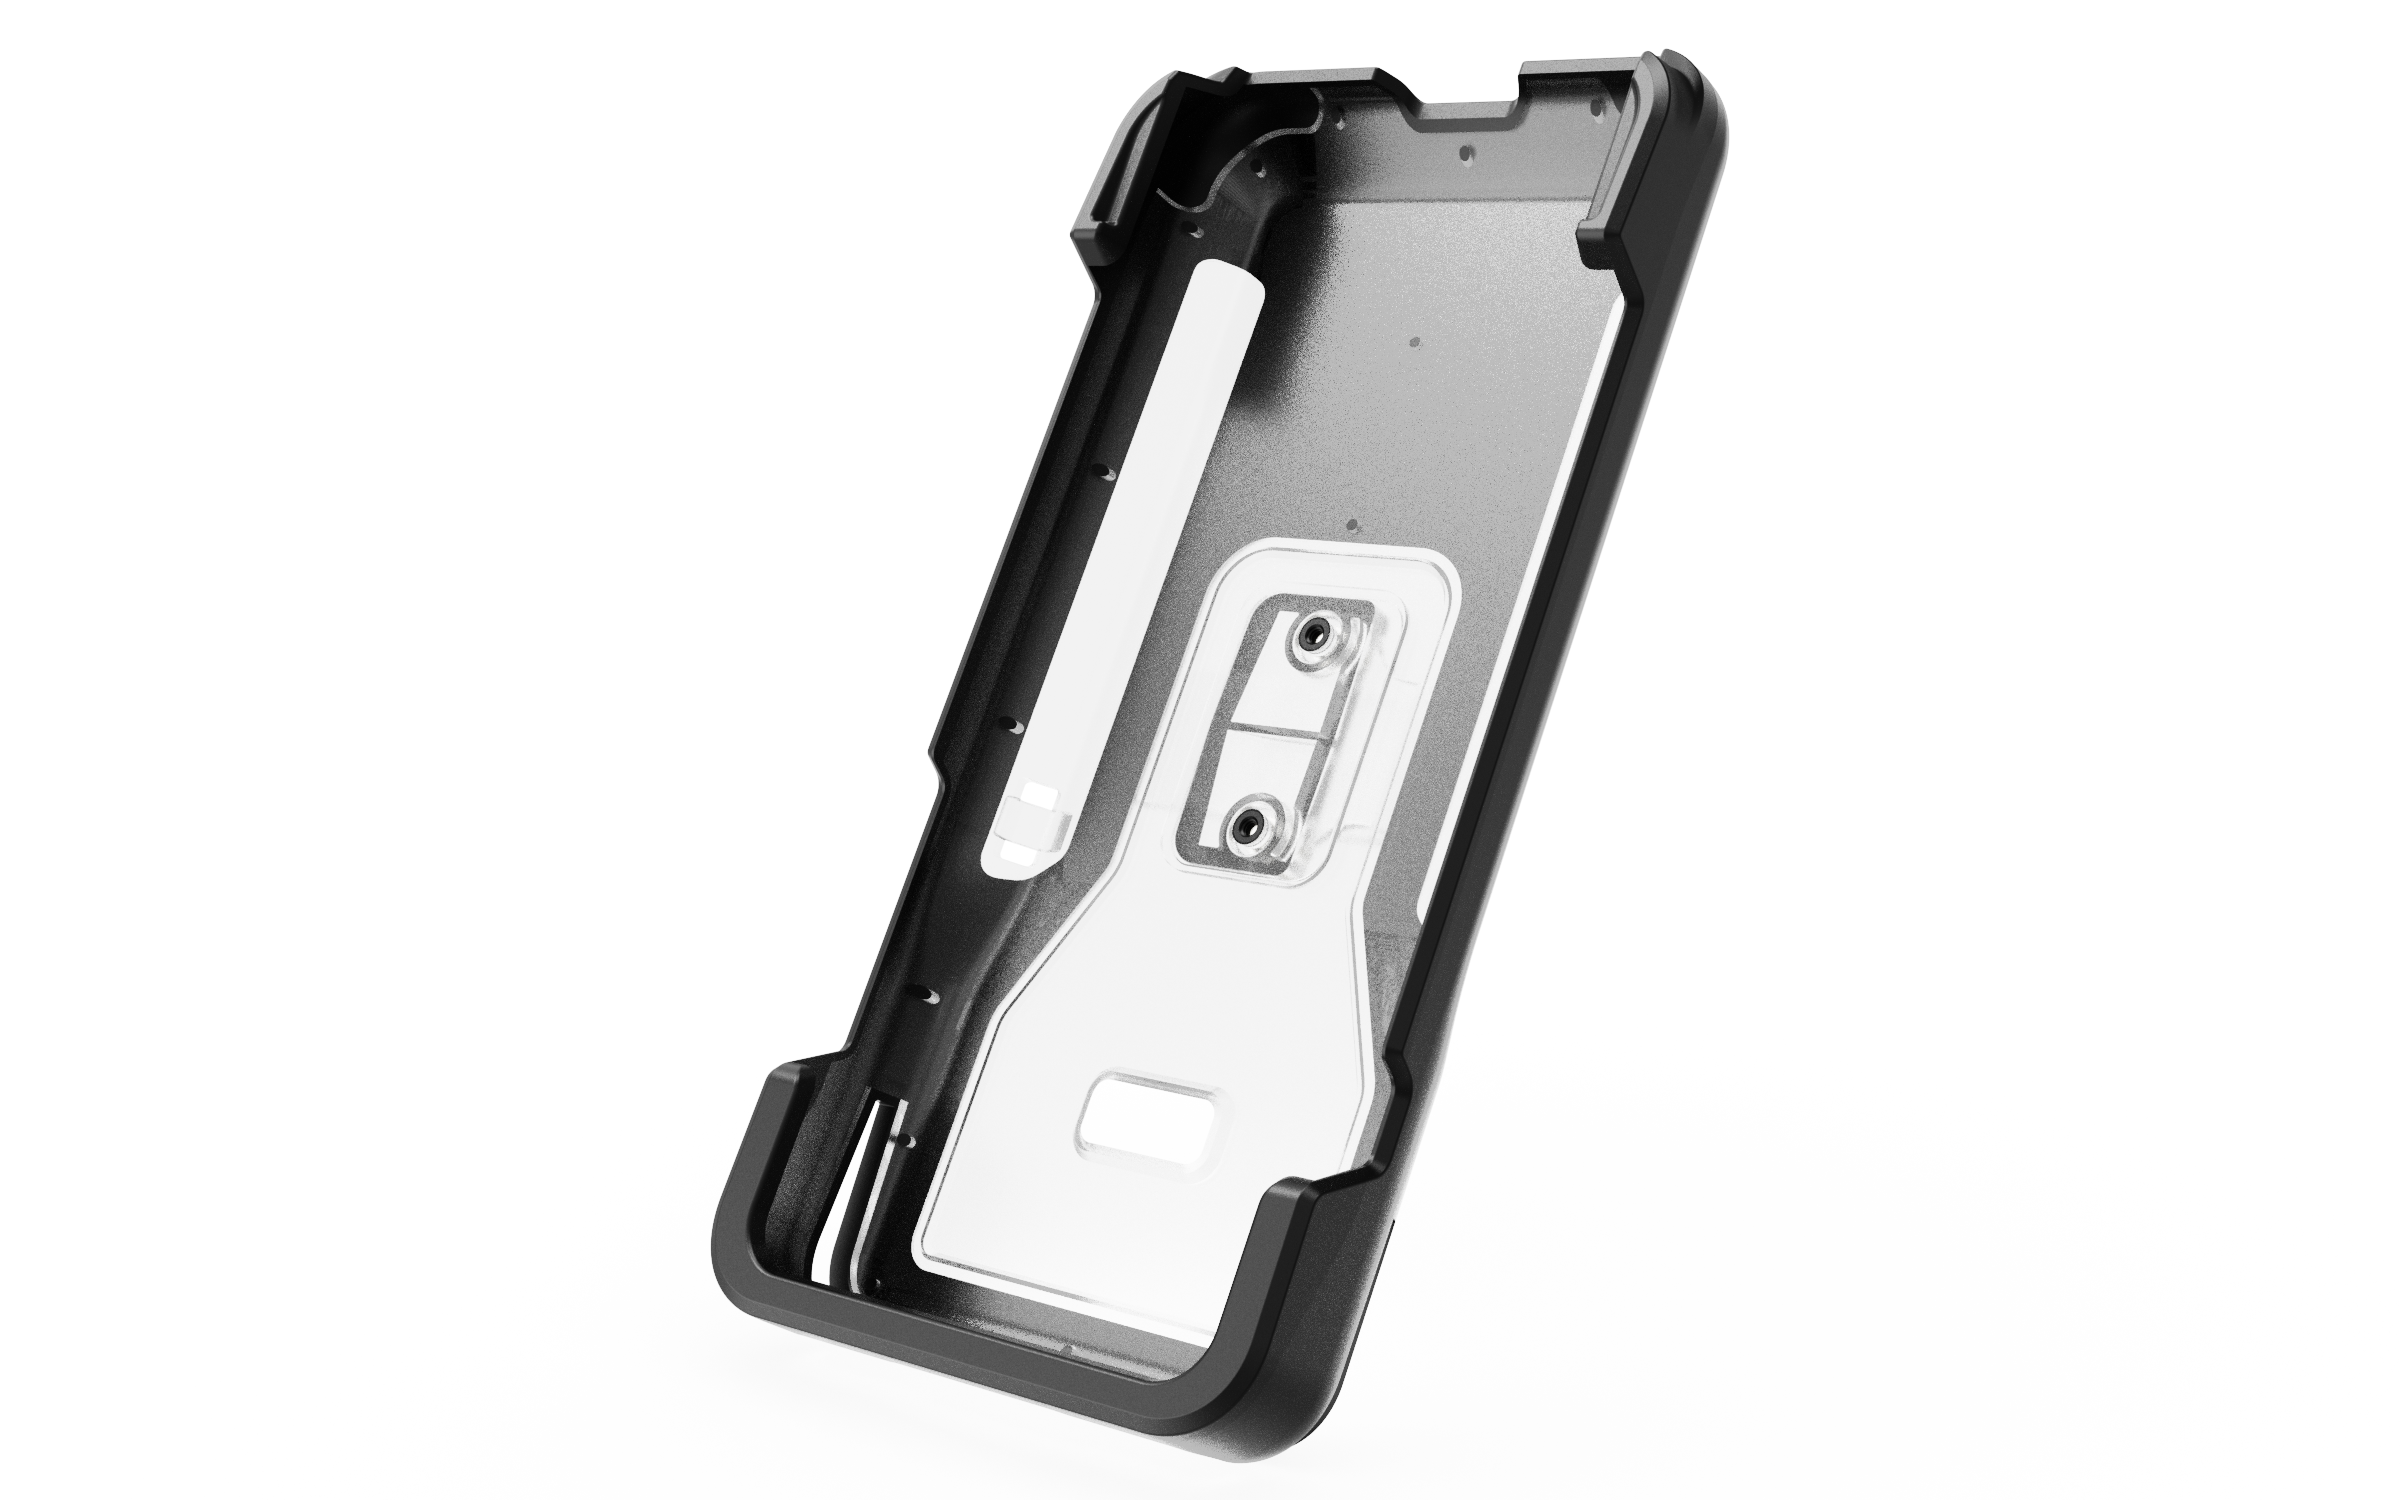 Mobile Protect & Go Case with Belt Clip for Pax A77 Mobile Payment Device